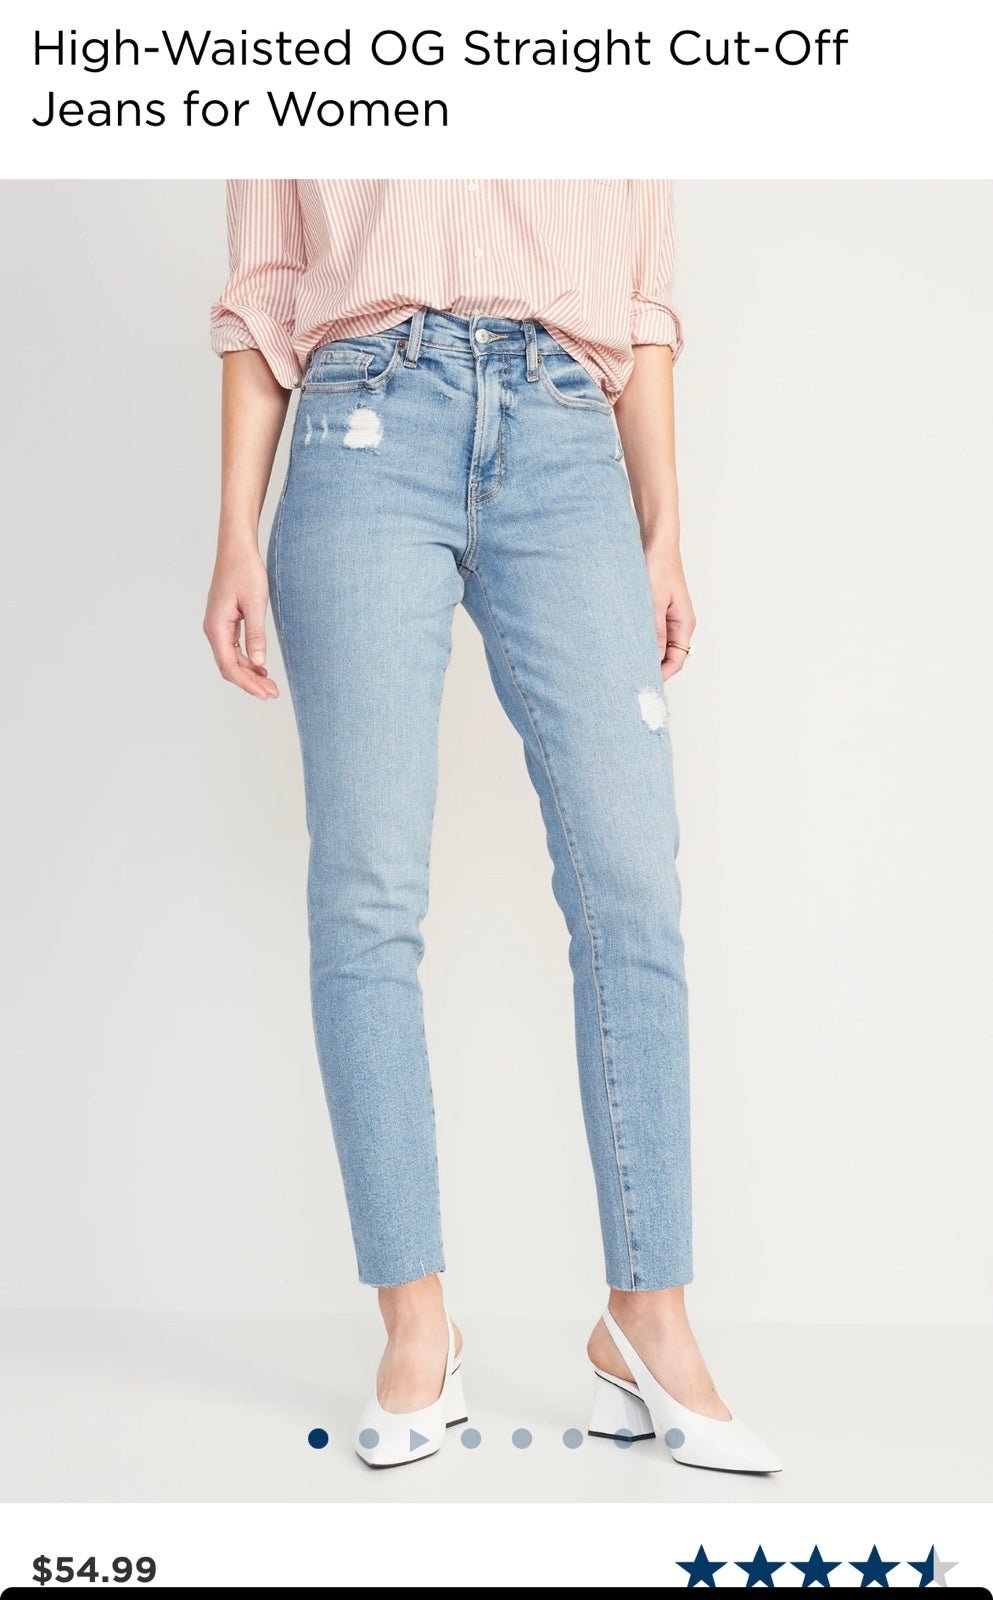 Promotions  Women’s Old Navy Jeans - high waisted FLunI